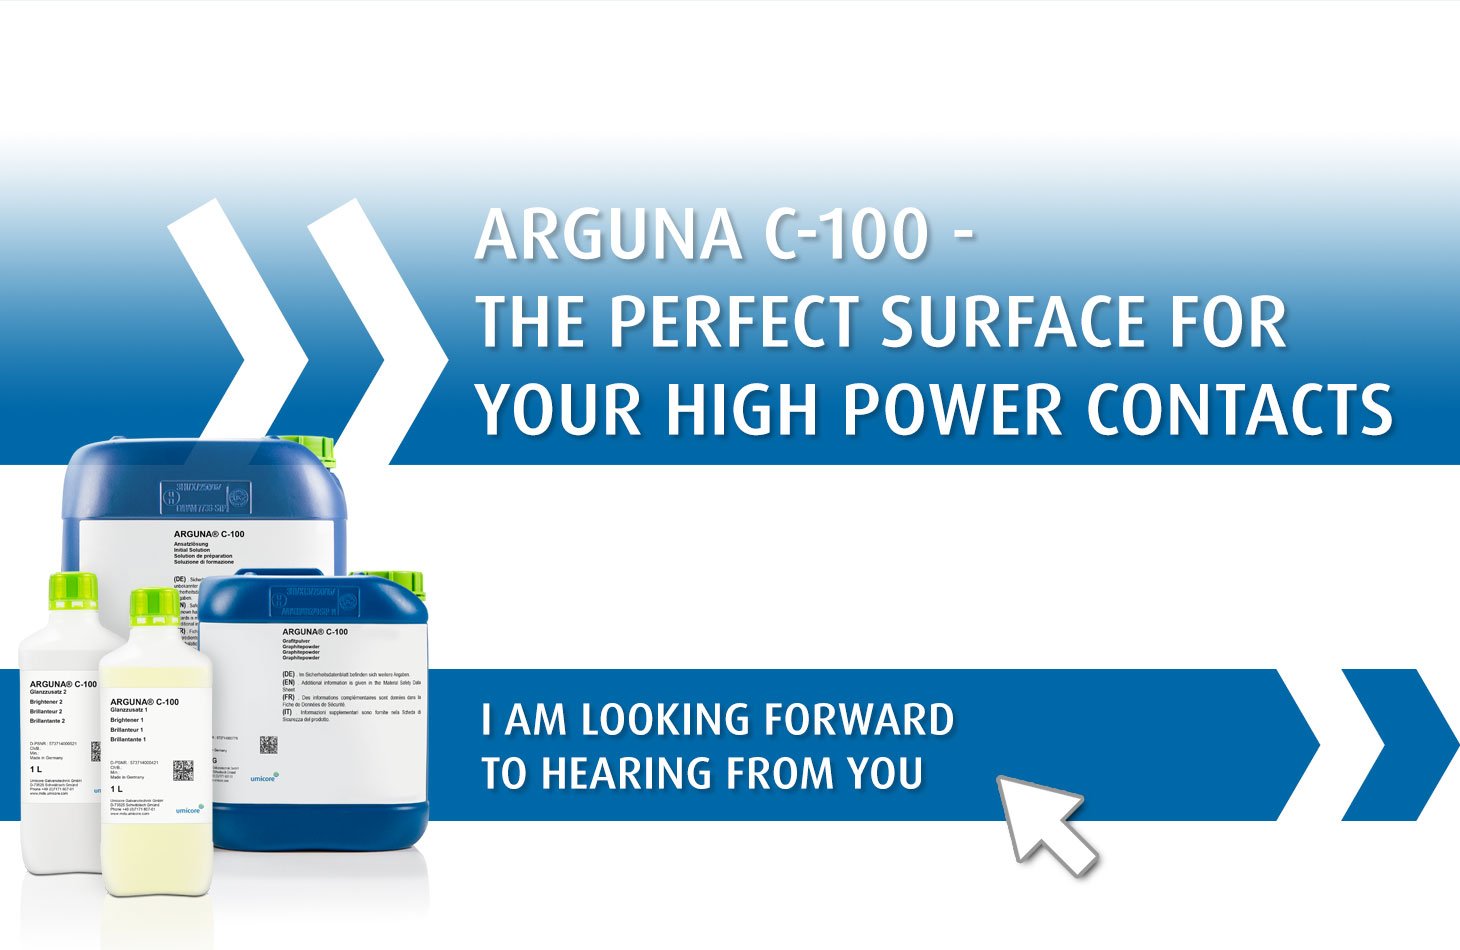 ARGUNA C-100 - Meeting New Requirements for High Voltage EV Charging Connectors - Contact